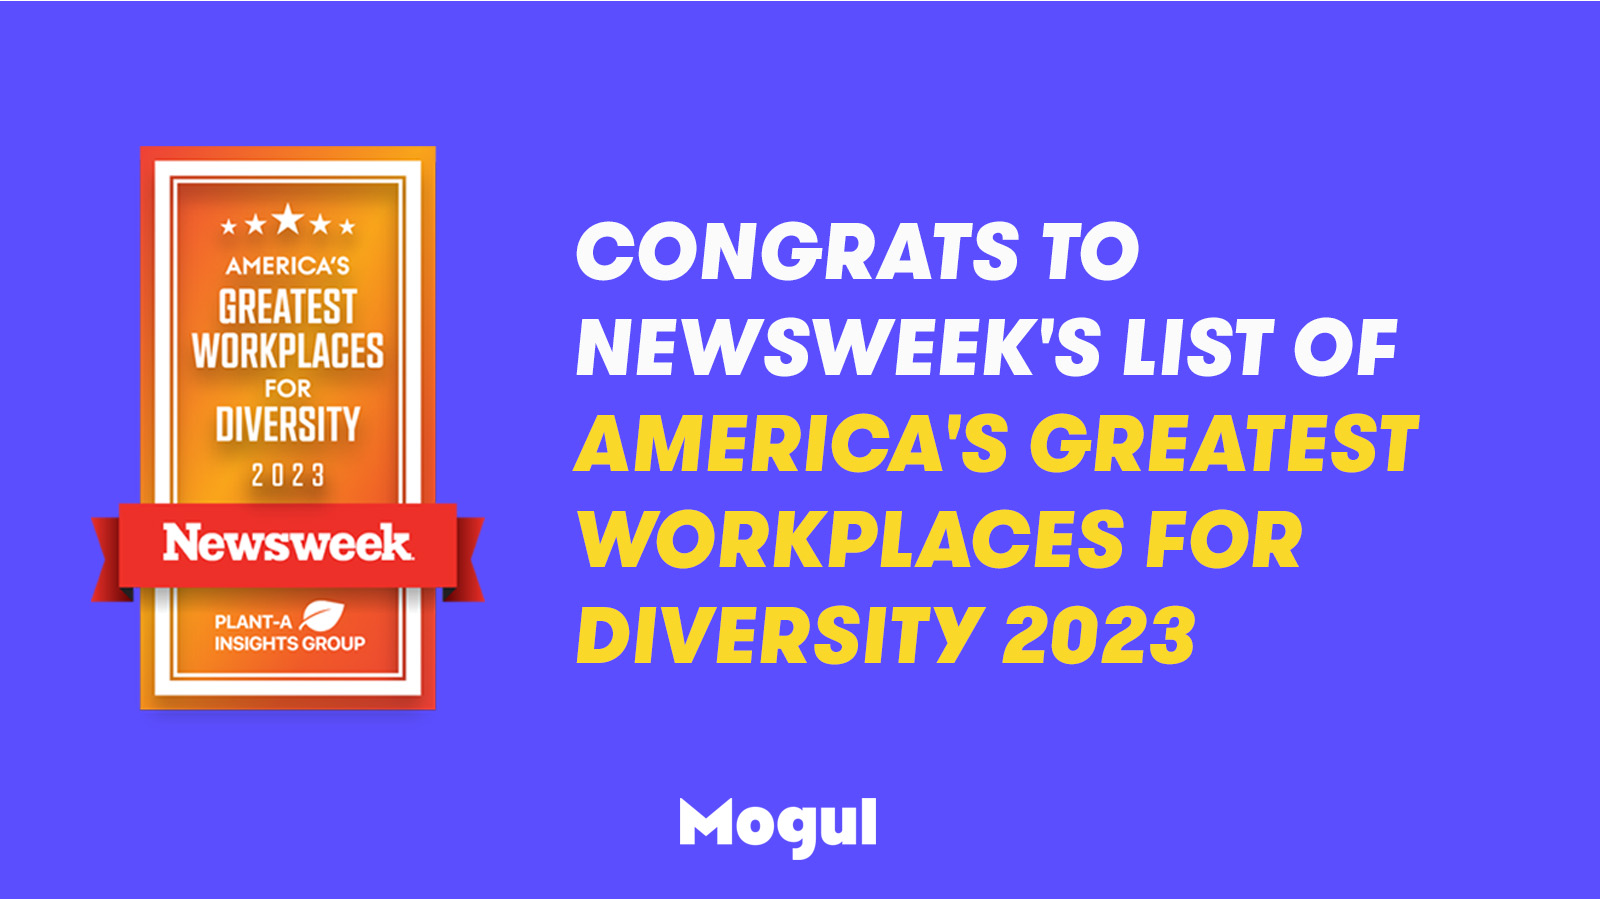 Congrats to Newsweek's List of America's Greatest Workplaces for Diversity 2023